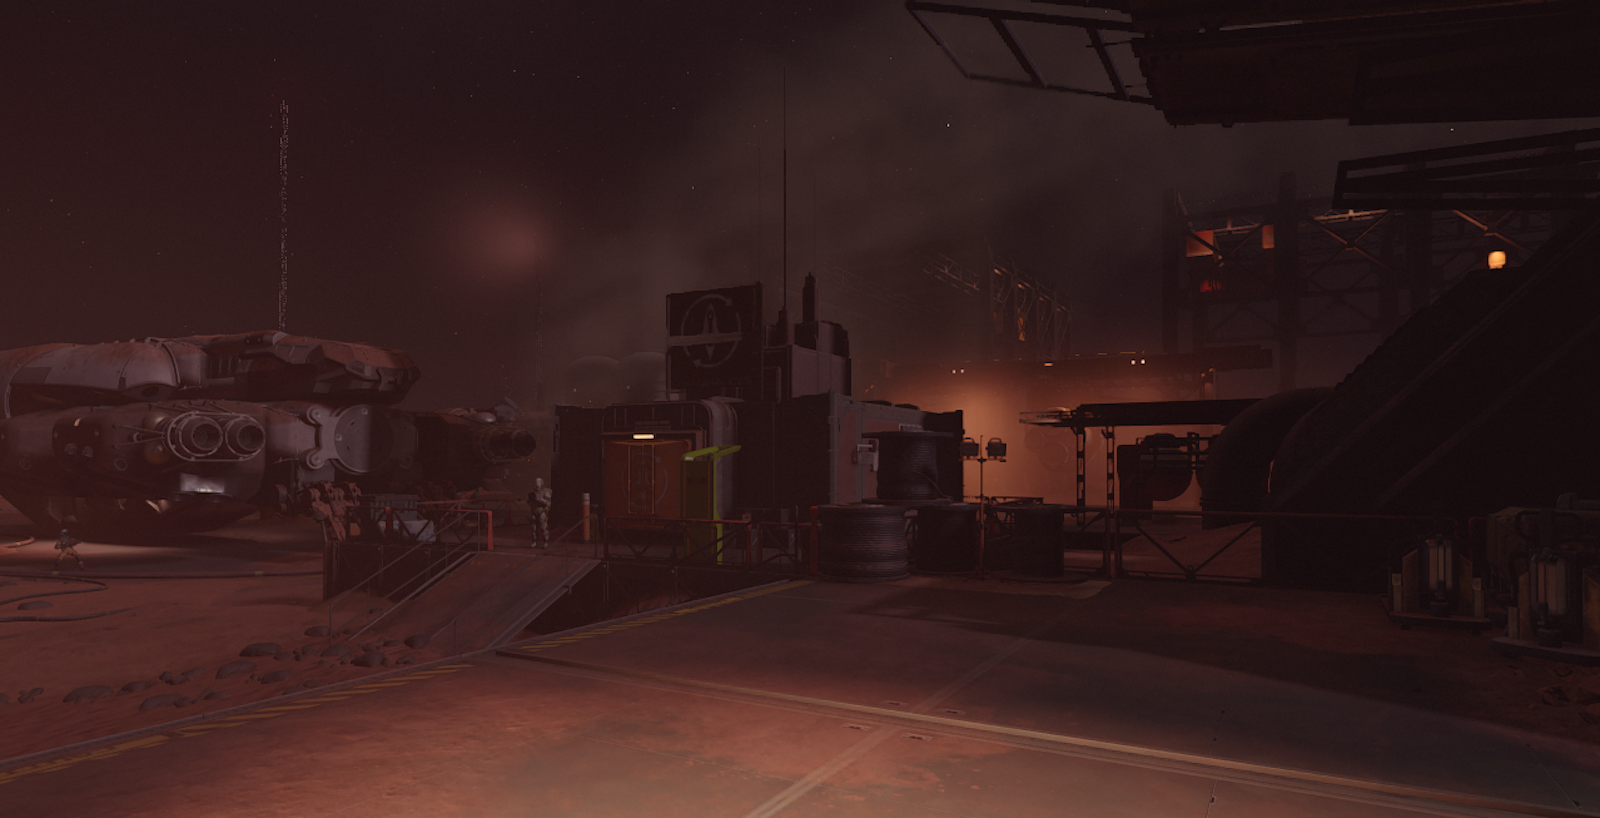 The Cydonia mining colony on Starfield. A dark and dusty area with guards standing in front of one of the gates.